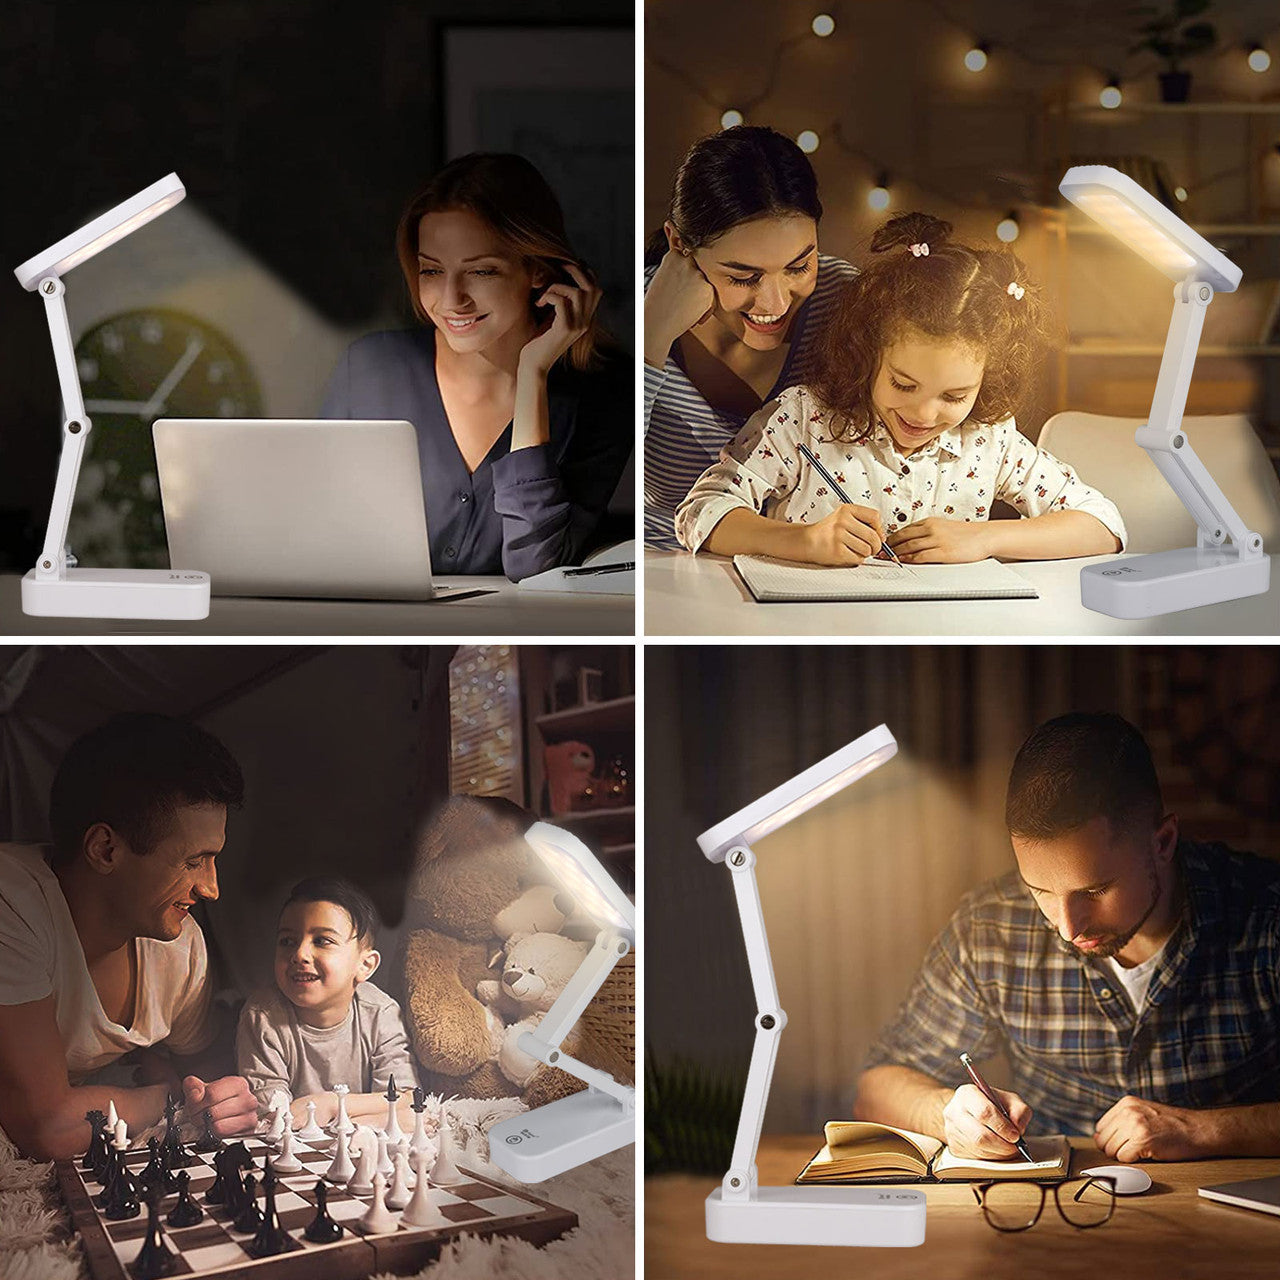 Lighting LED Desk Lamp with 3 Different Lighting Modes and Long Lasting, 1 Pack